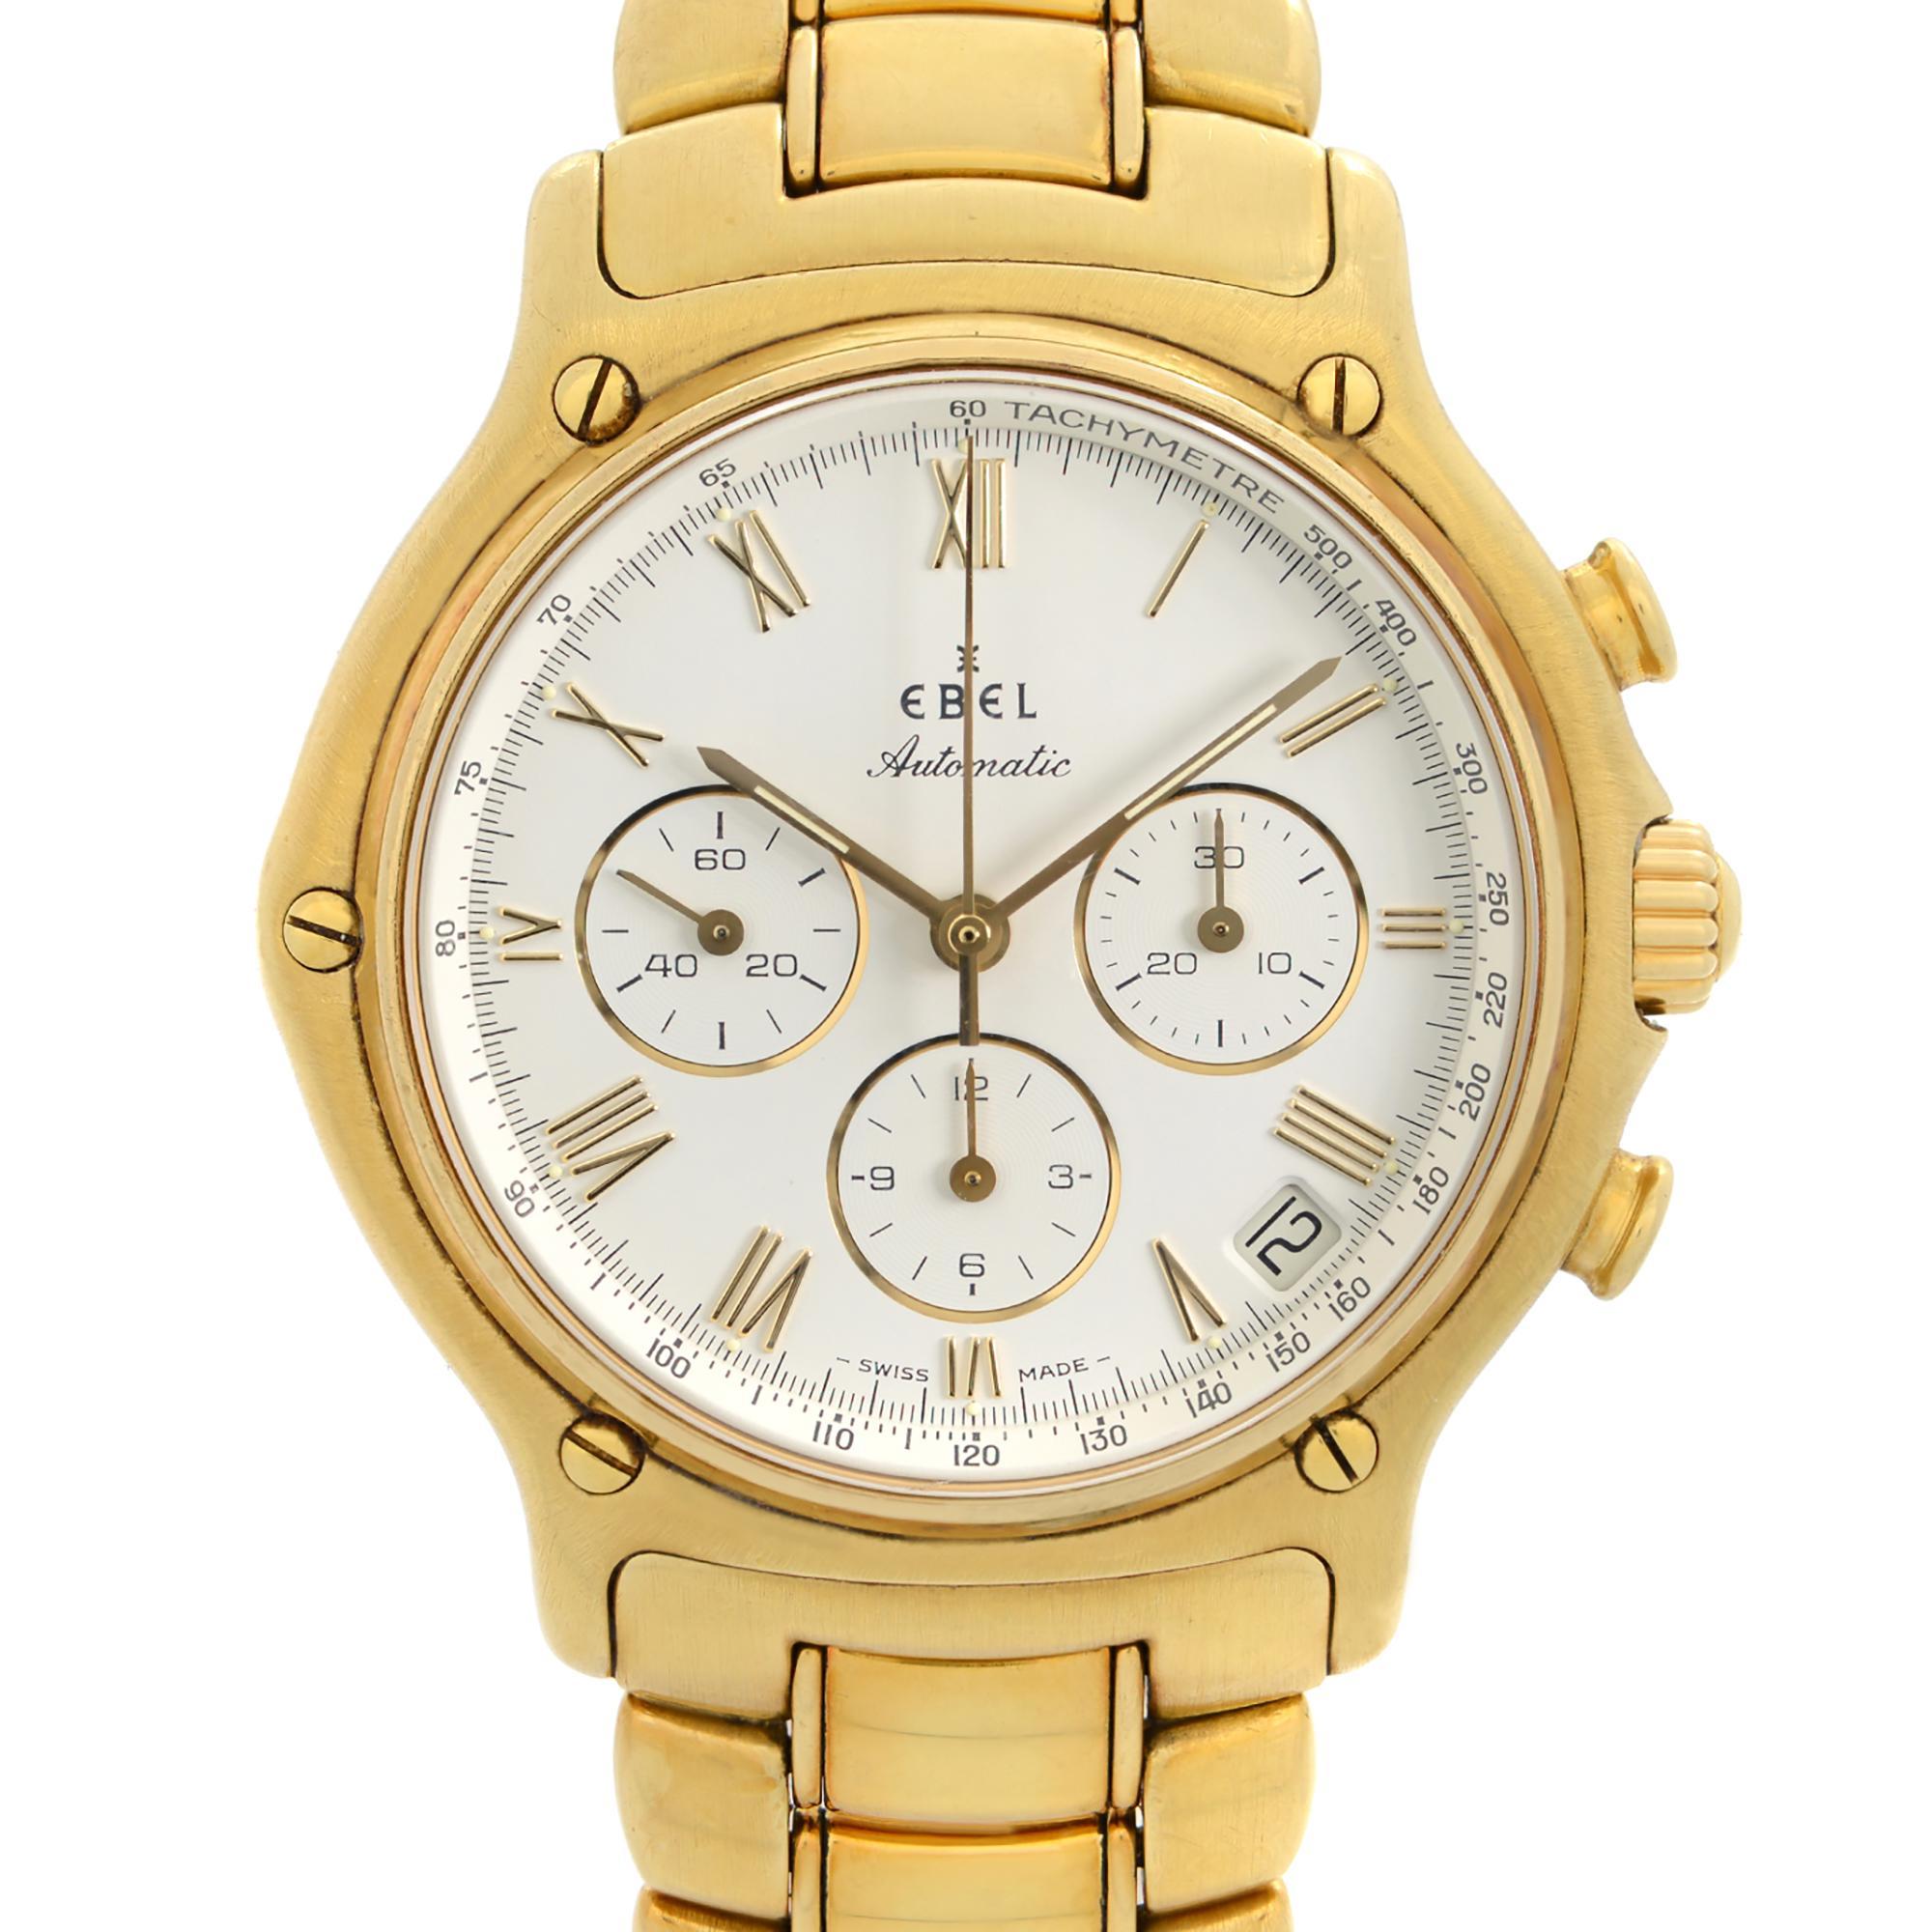 Pre-owned Ebel 1911 38mm Chronograph 18k Yellow Gold White Dial Automatic Men's Watch 8134901. This Beautiful Timepiece is Powered by an Automatic Movement and Features: 18k Yellow Gold Case and Bracelet, Fixed 18k Yellow Gold Bezel, White Dial with